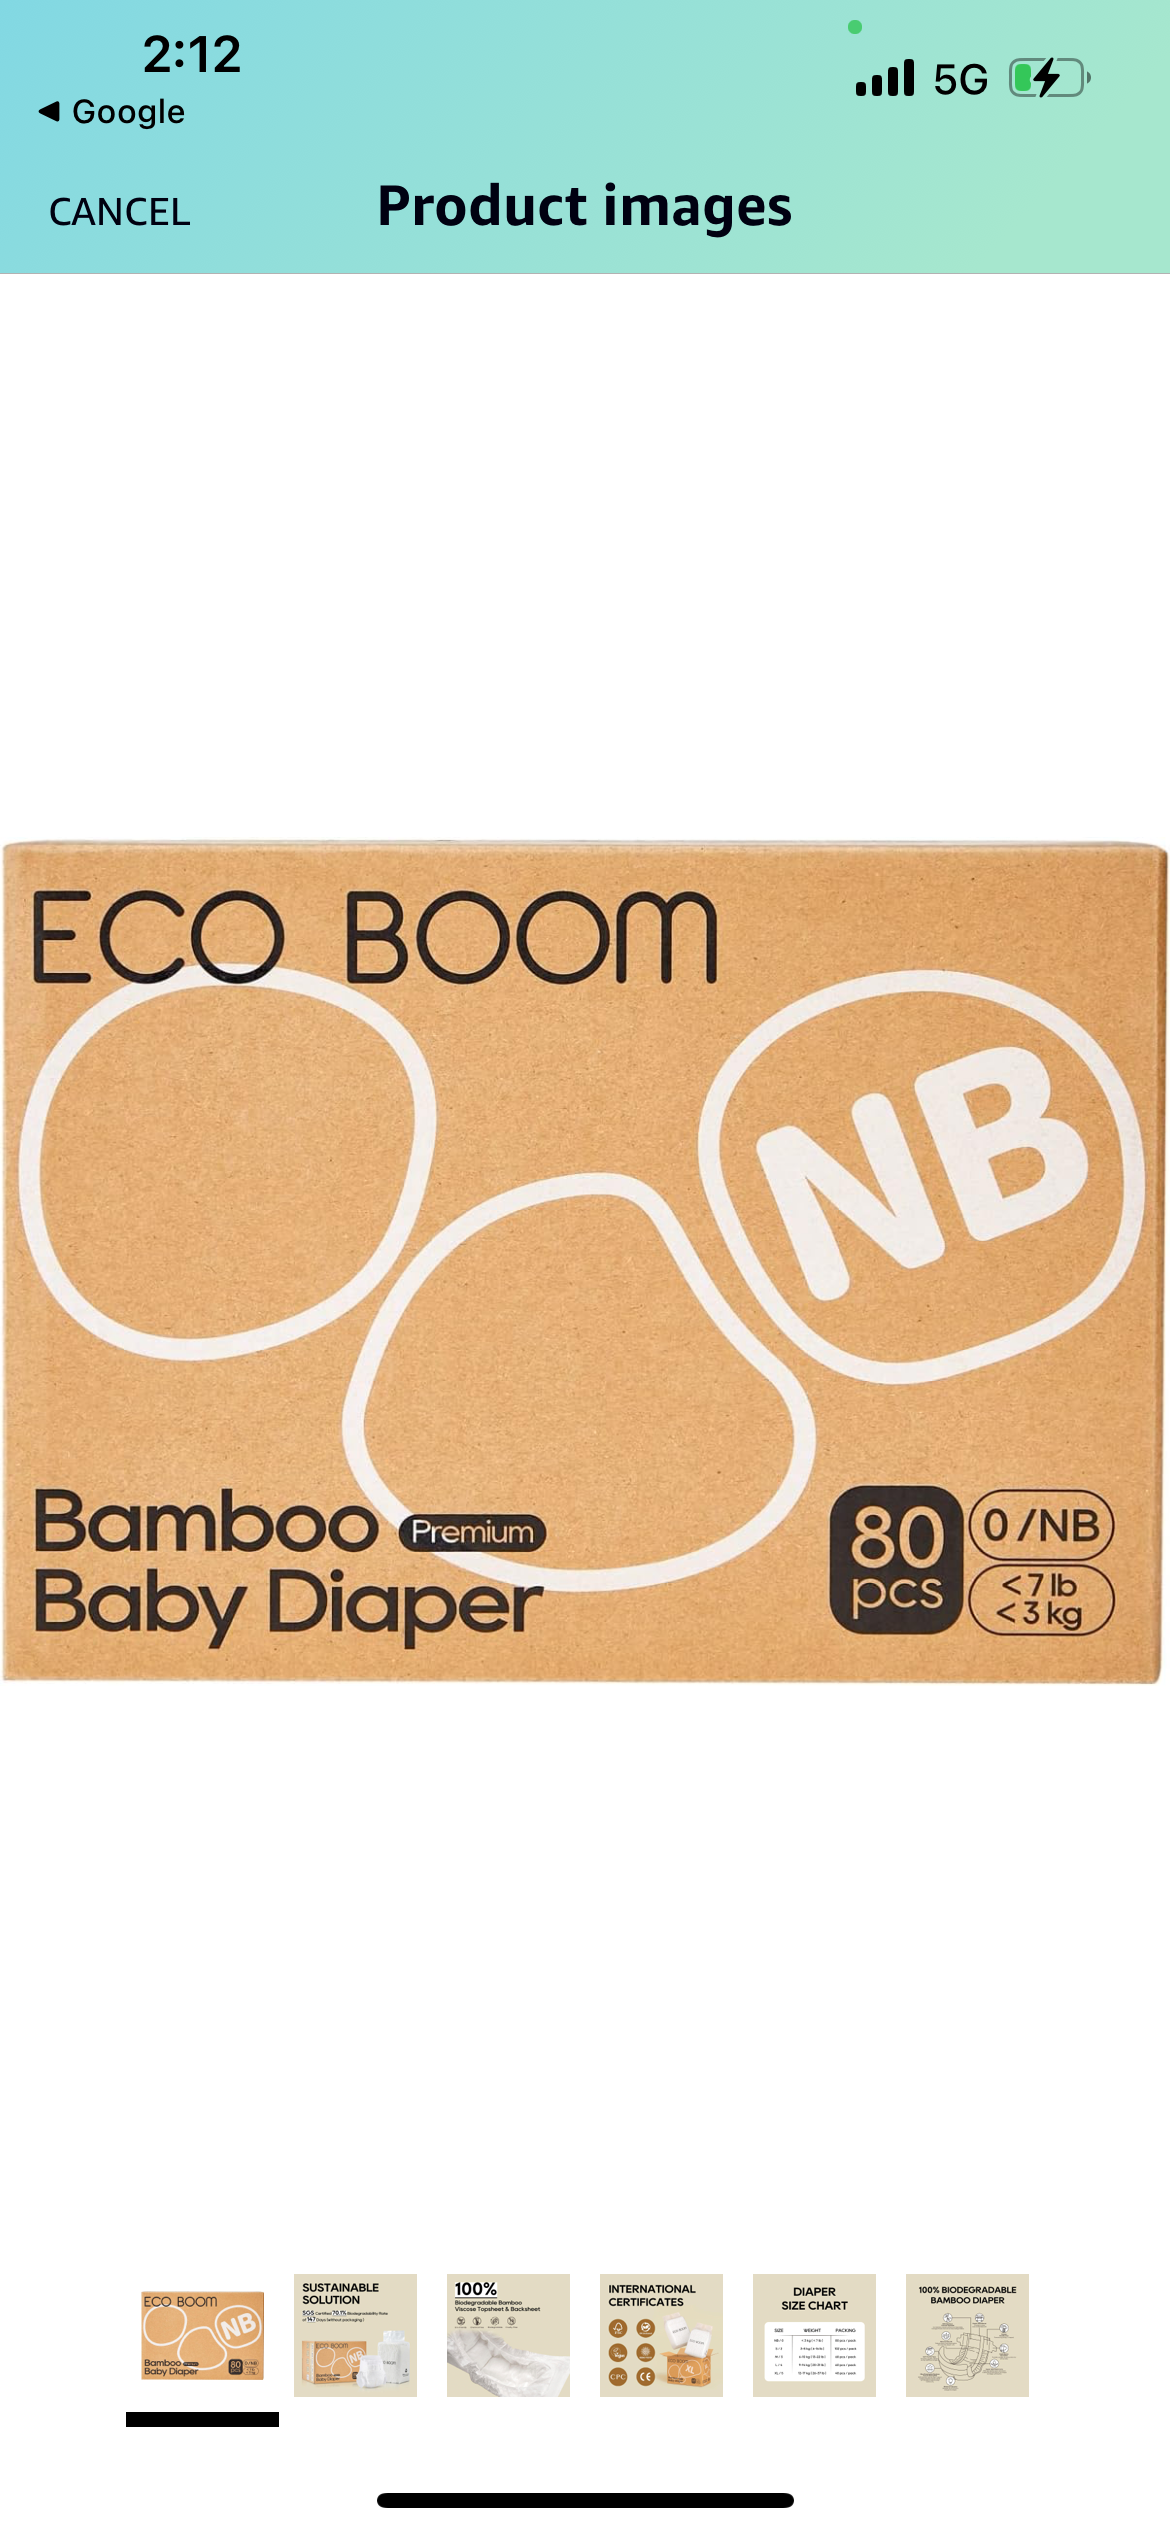 ECO BOOM Diapers, Baby Bamboo Viscose Diapers, Eco-Friendly Natural Soft Disposable Nappies for Infant, Size 0 Suitable for up to 7 lbs (Newborn - 80 Count)